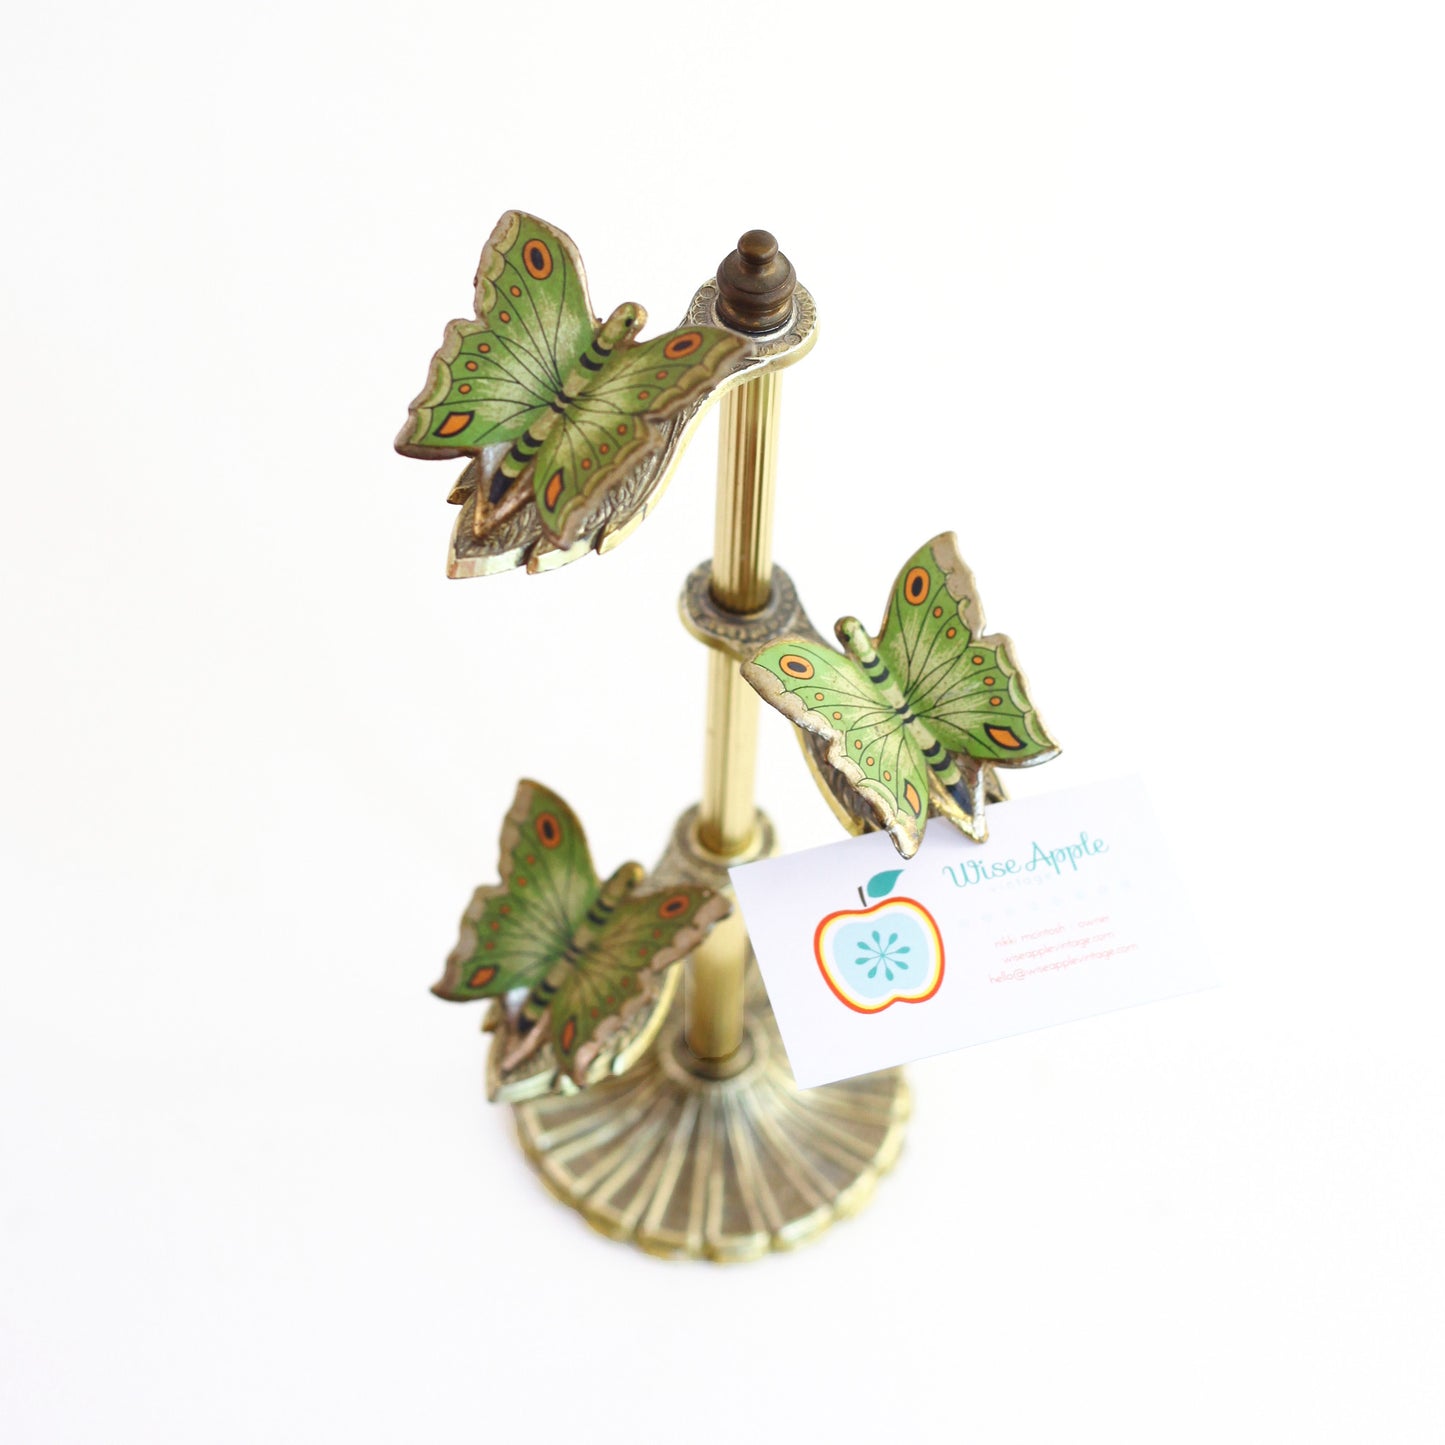 SOLD - Vintage Brass Butterfly Note Holder & Photo Display